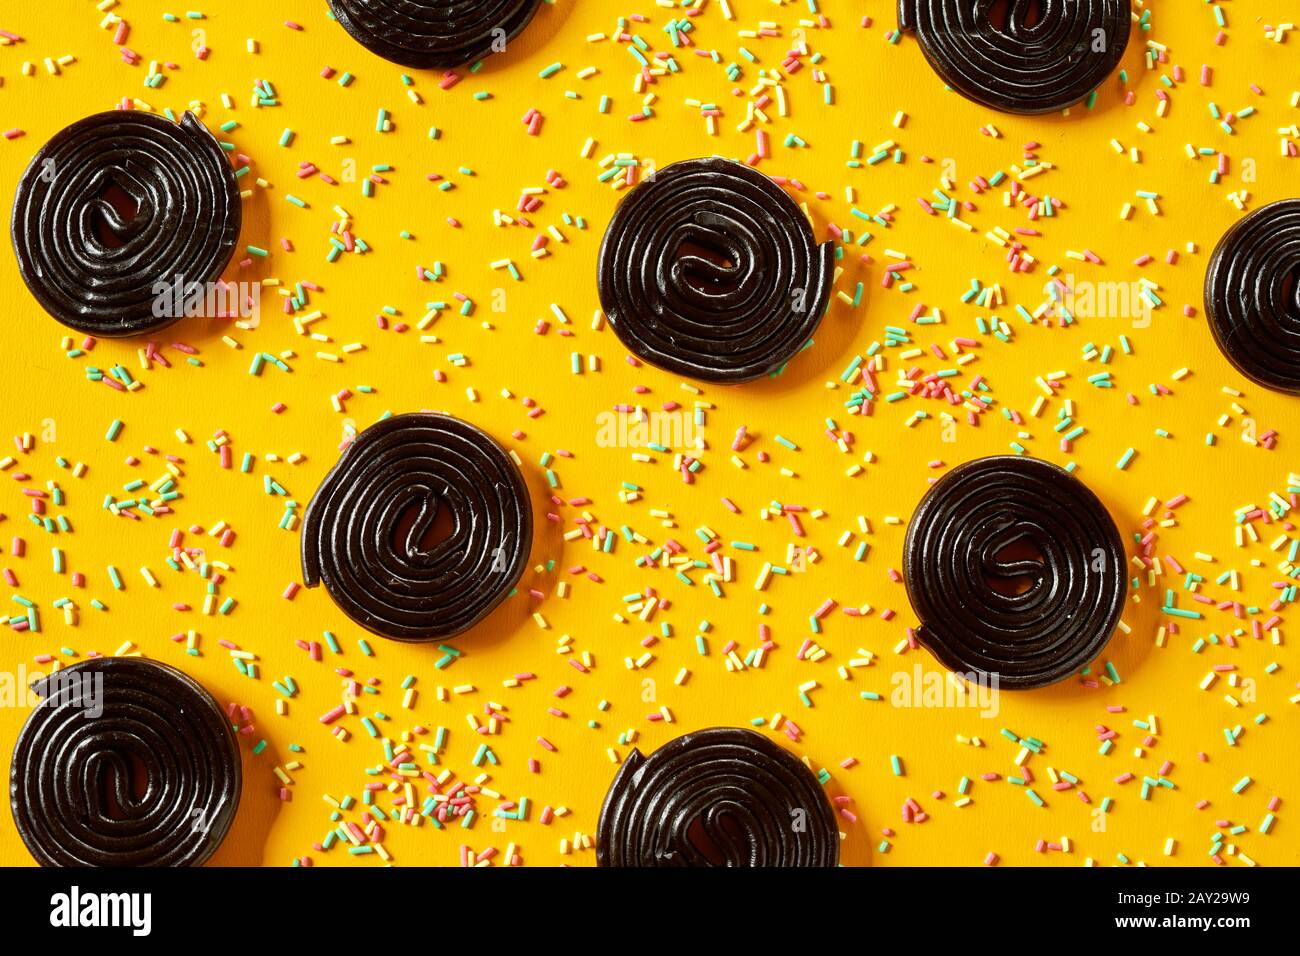 Rows of spiral liquorice coils with colorful baking sprinkles background texture over a bright yellow surface in a full frame view Stock Photo